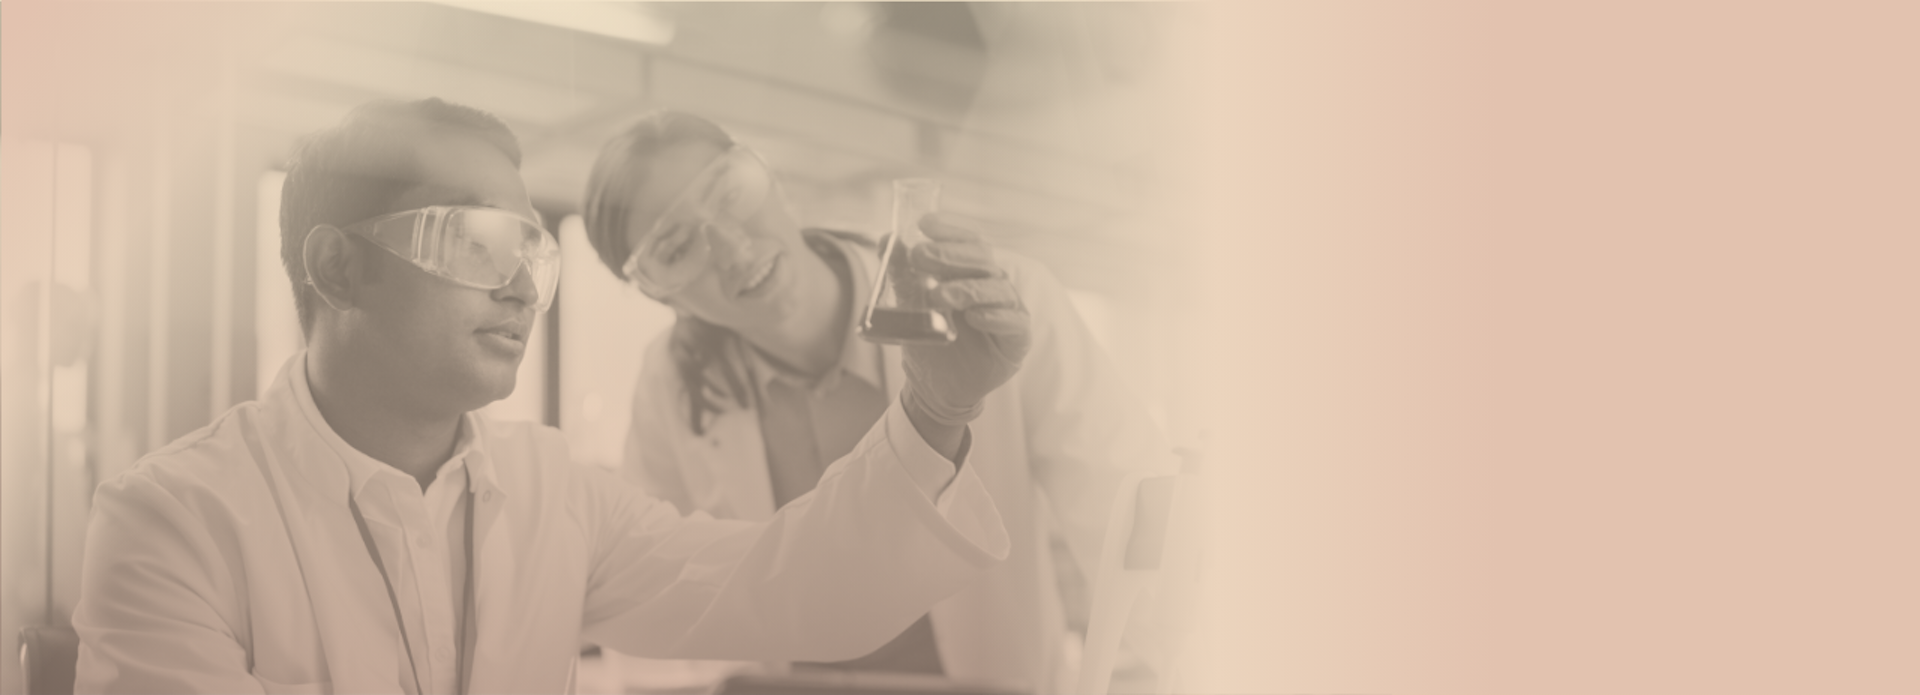 Black and white image with beige overlay of two scientists in lab coats and safety goggles looking into a beaker.